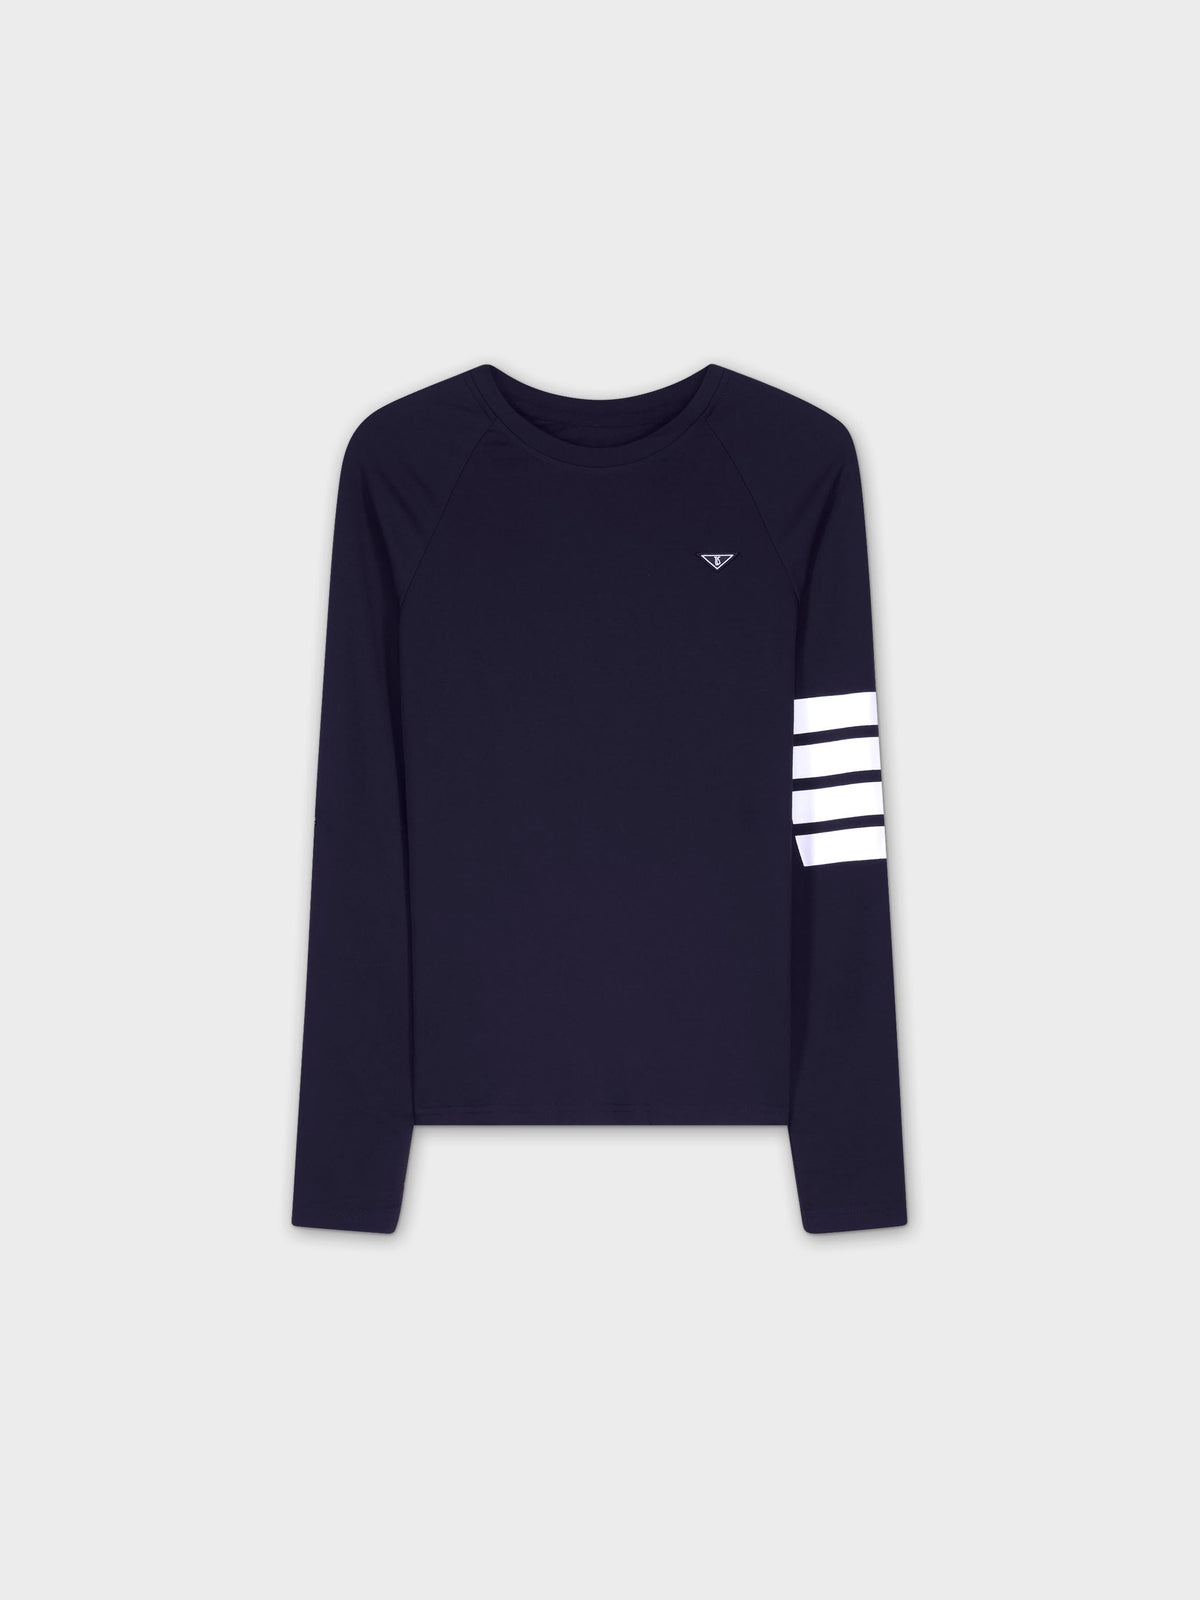 STRIPED ATHLETIC TEE-NAVY